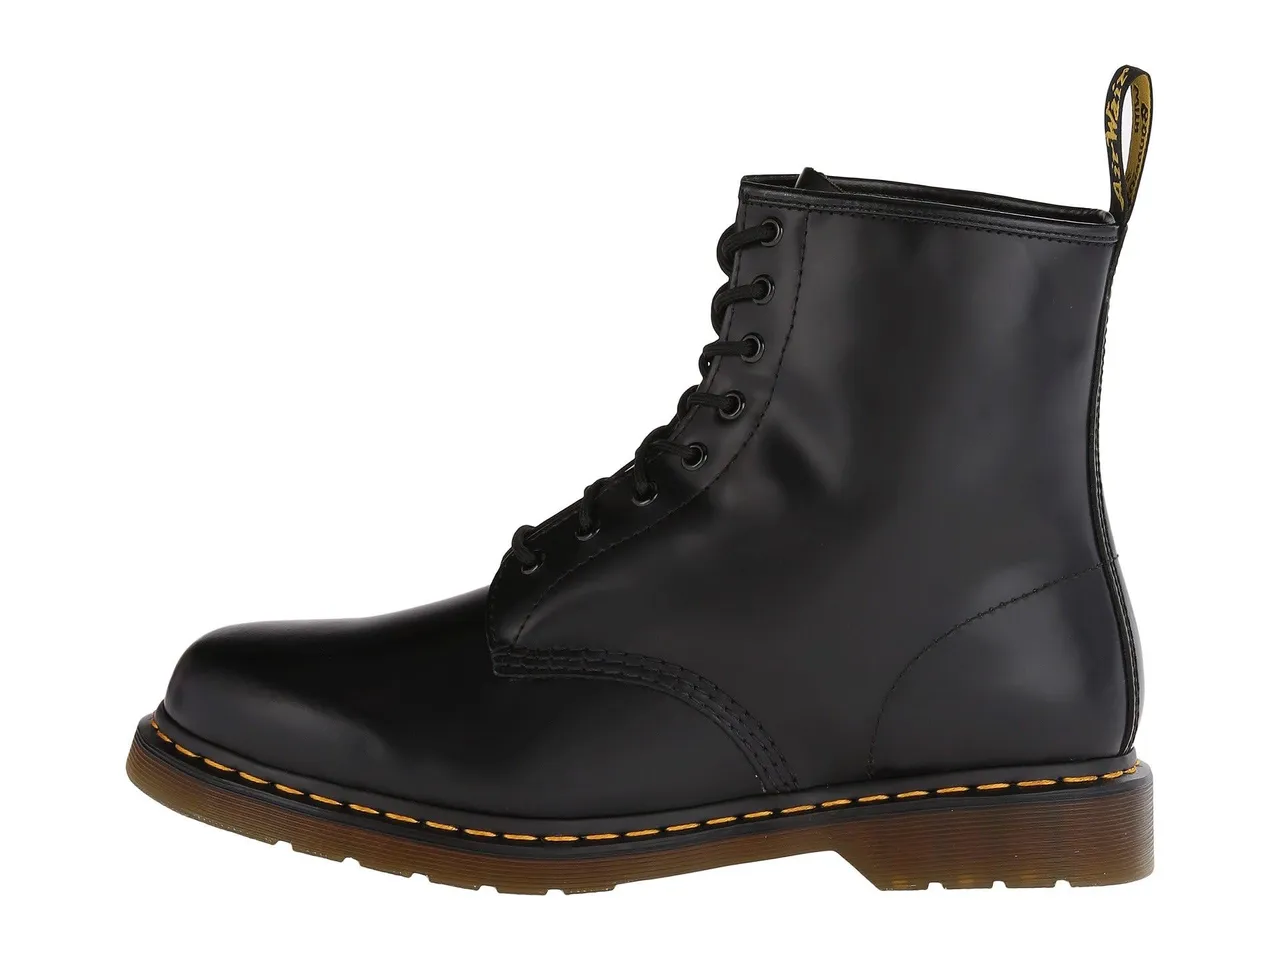 Dr Martens Unisex Adults 1460 Smooth Classic Boots